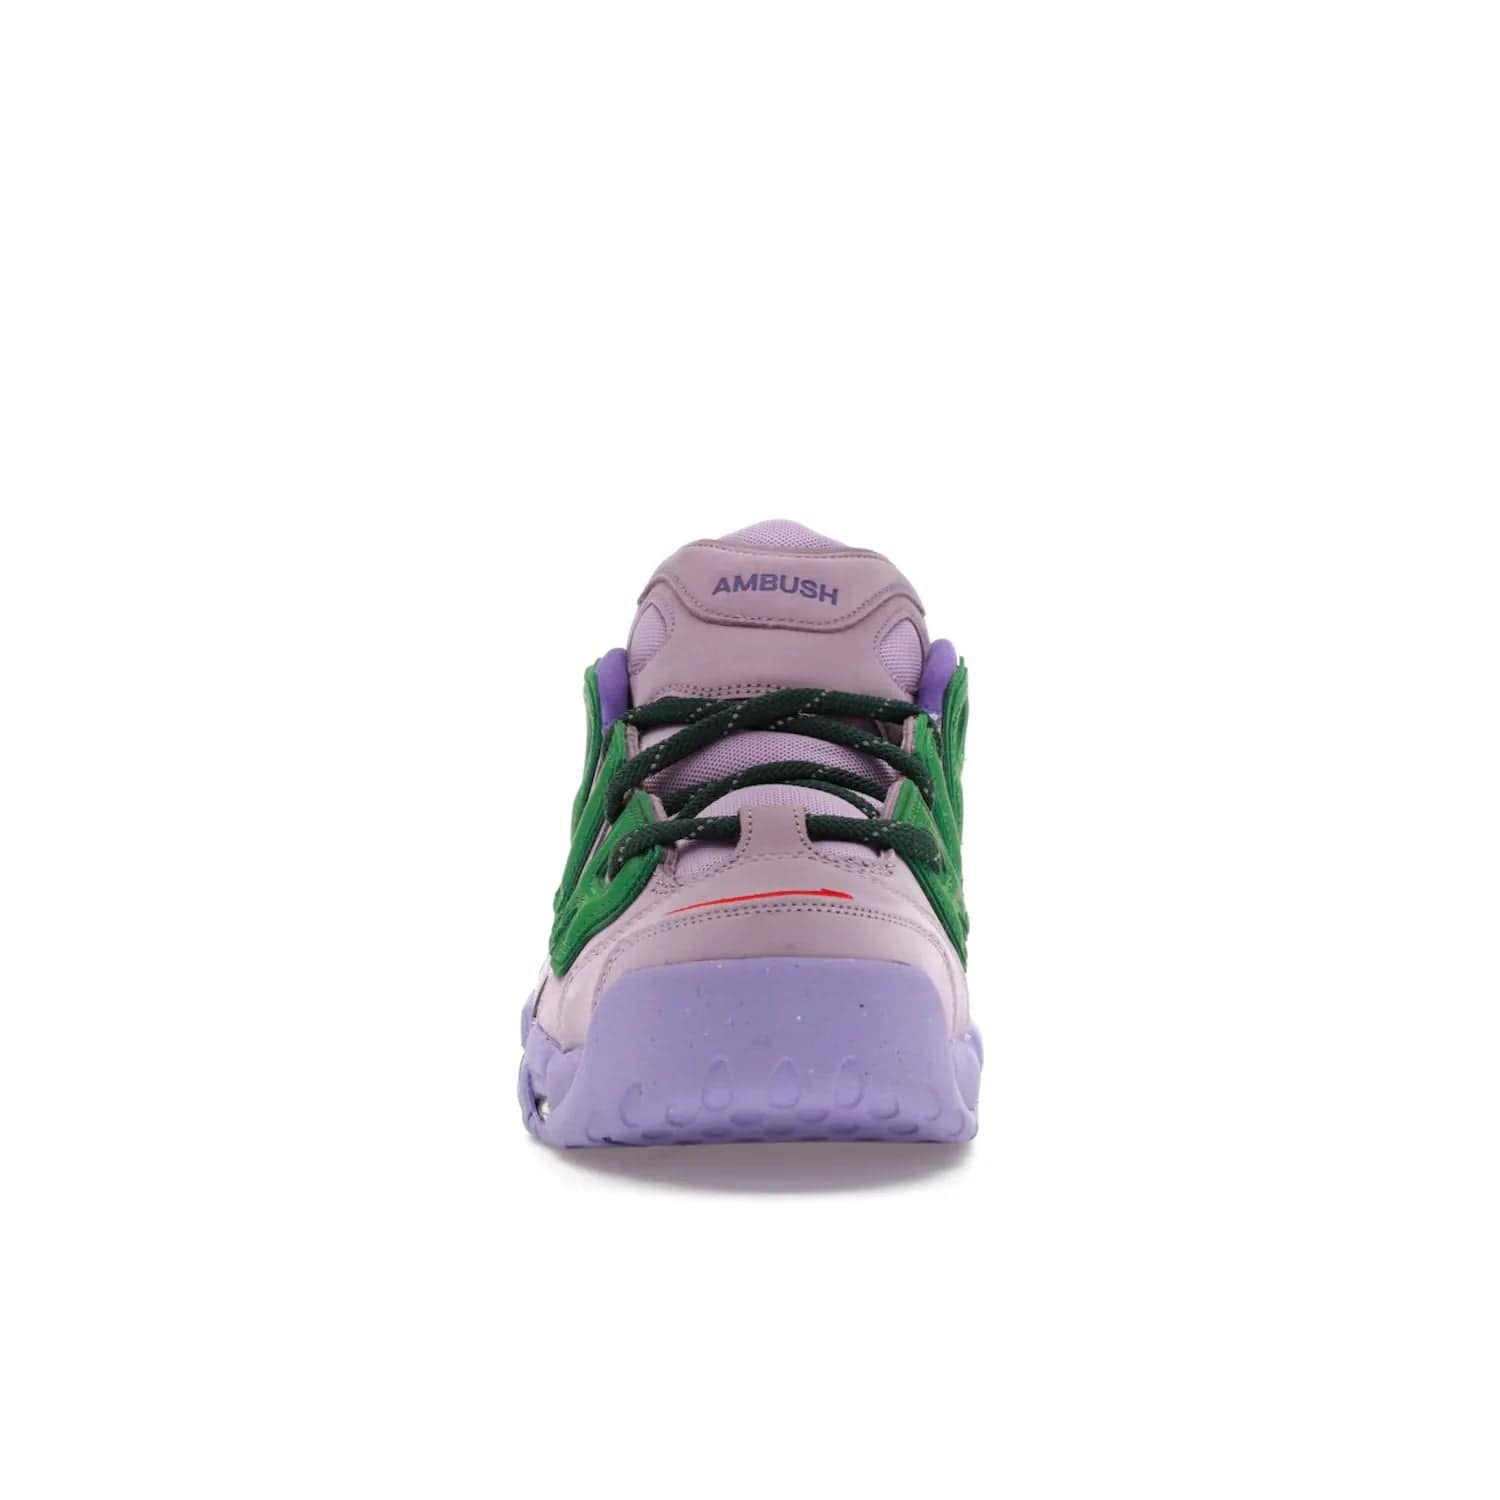 Nike Air More Uptempo Low AMBUSH Lilac - Image 10 - Only at www.BallersClubKickz.com - Style and comfort meet with the Nike Air More Uptempo Low AMBUSH Lilac. Featuring a vibrant Lilac upper with Apple Green and University Red accents, this unique design will be a standout in any wardrobe. Get your pair on October 06, 2023.